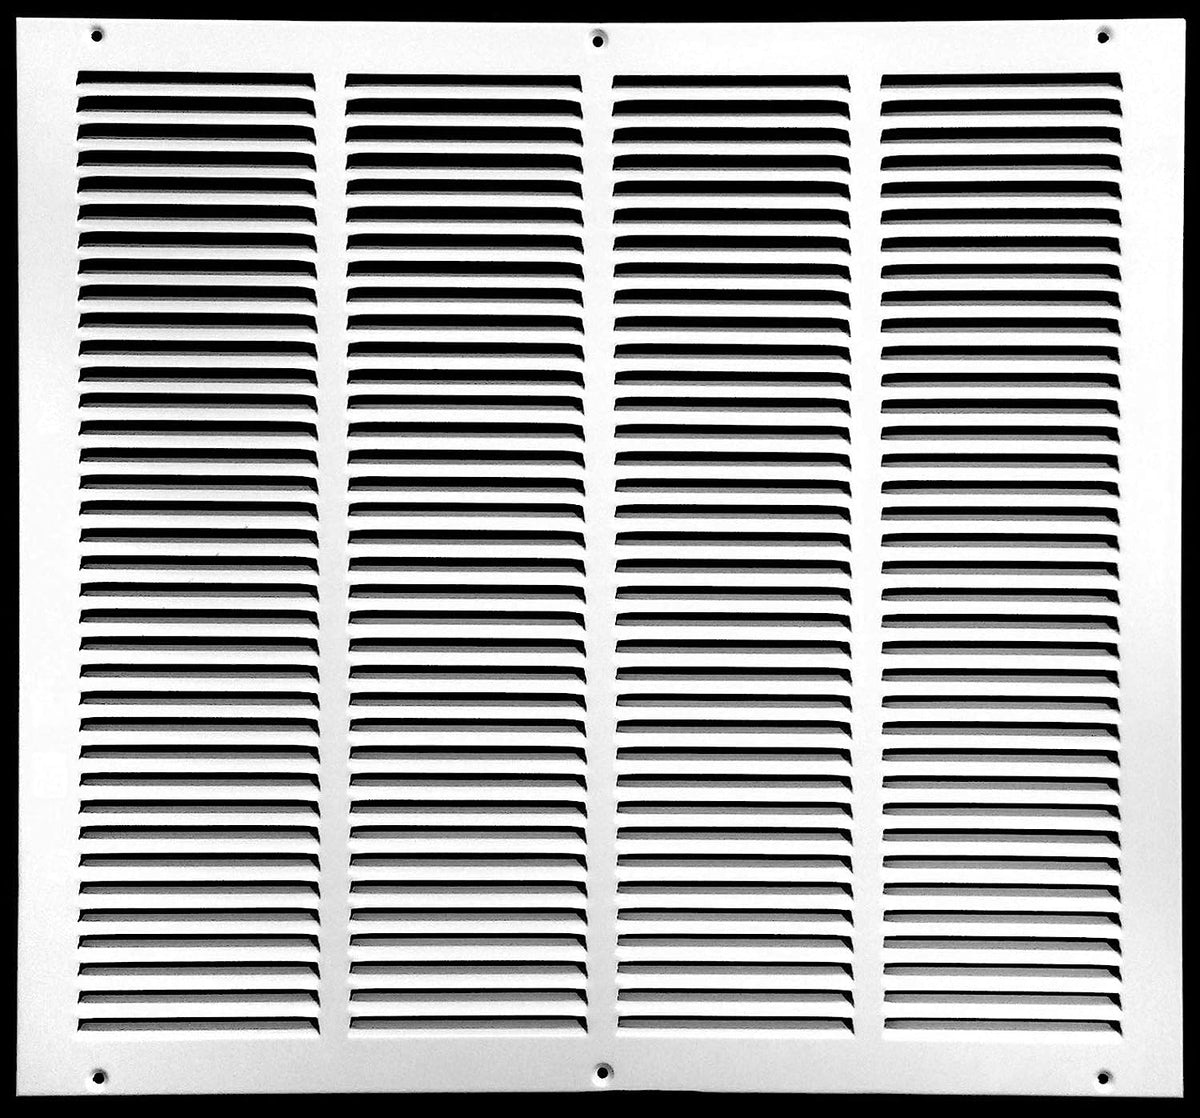 14&quot; X 14&quot; Air Vent Return Grilles - Sidewall and Ceiling - HVAC VENT DUCT COVER DIFFUSER - Steel